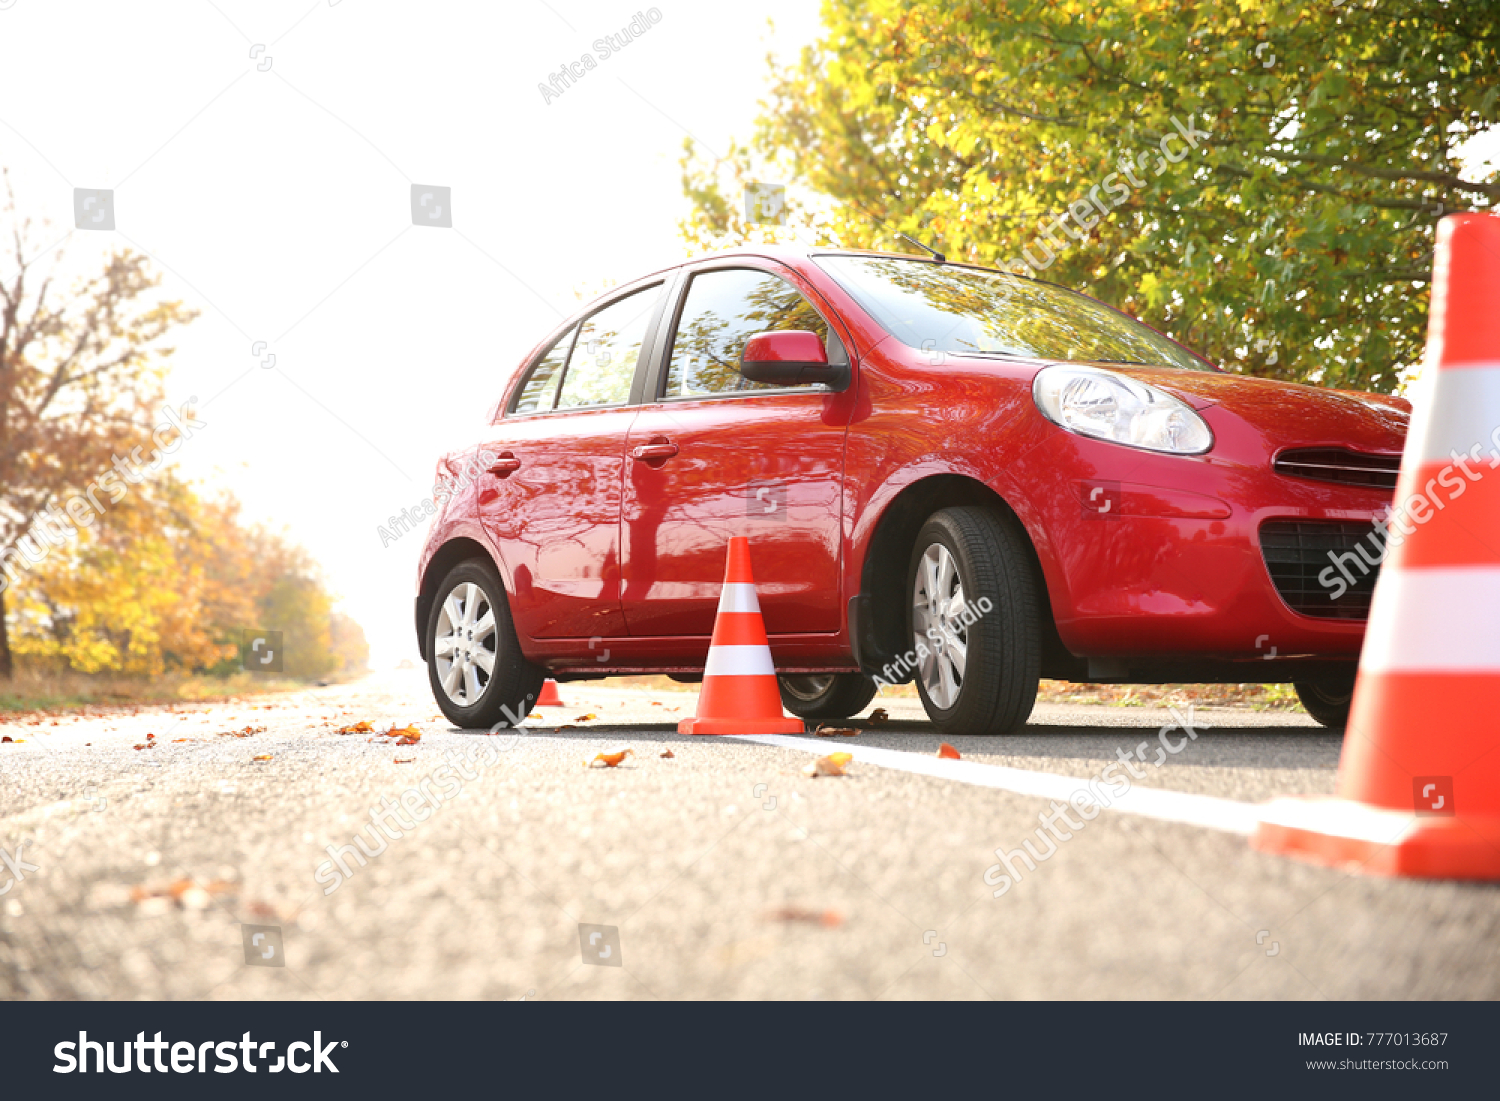 Beautiful red car and safety cones in driving school #777013687